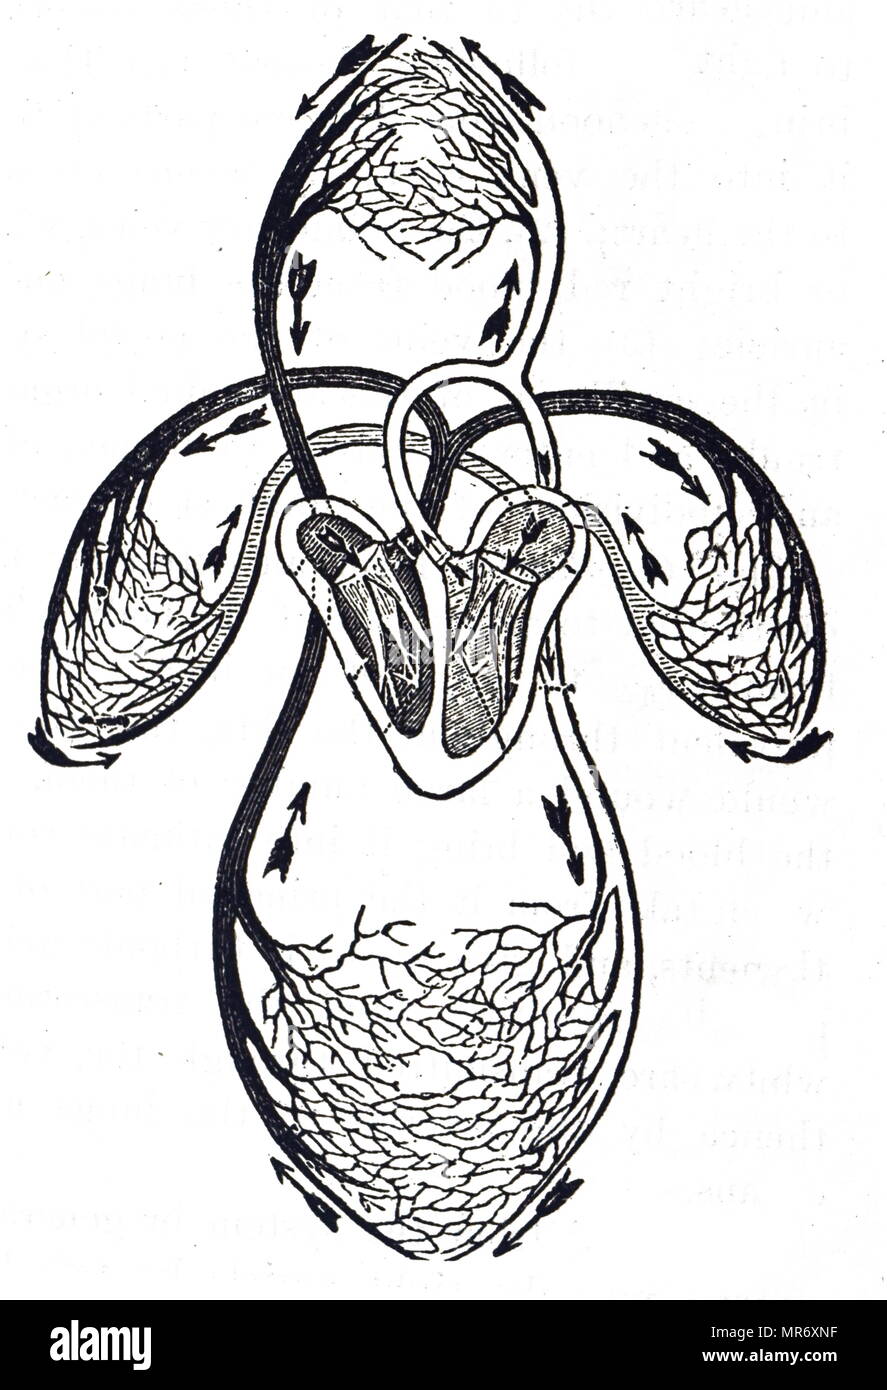 Diagram of the circulation of blood as understood after William Harvey's work, showing blood leaving the left ventricle of the heart by the aorta and returning to the heart via the vena cava at the right auricle: it has now completed the Greater Circulation. It next passes to the right ventricle and out into the Pulmonary Artery and undertakes the Lesser Circulation (Pulmonary Circulation) and returns to the heart at the left auricle. William Harvey (1578-1657) an English physician who made seminal contributions in anatomy and physiology. Dated 20th century Stock Photo